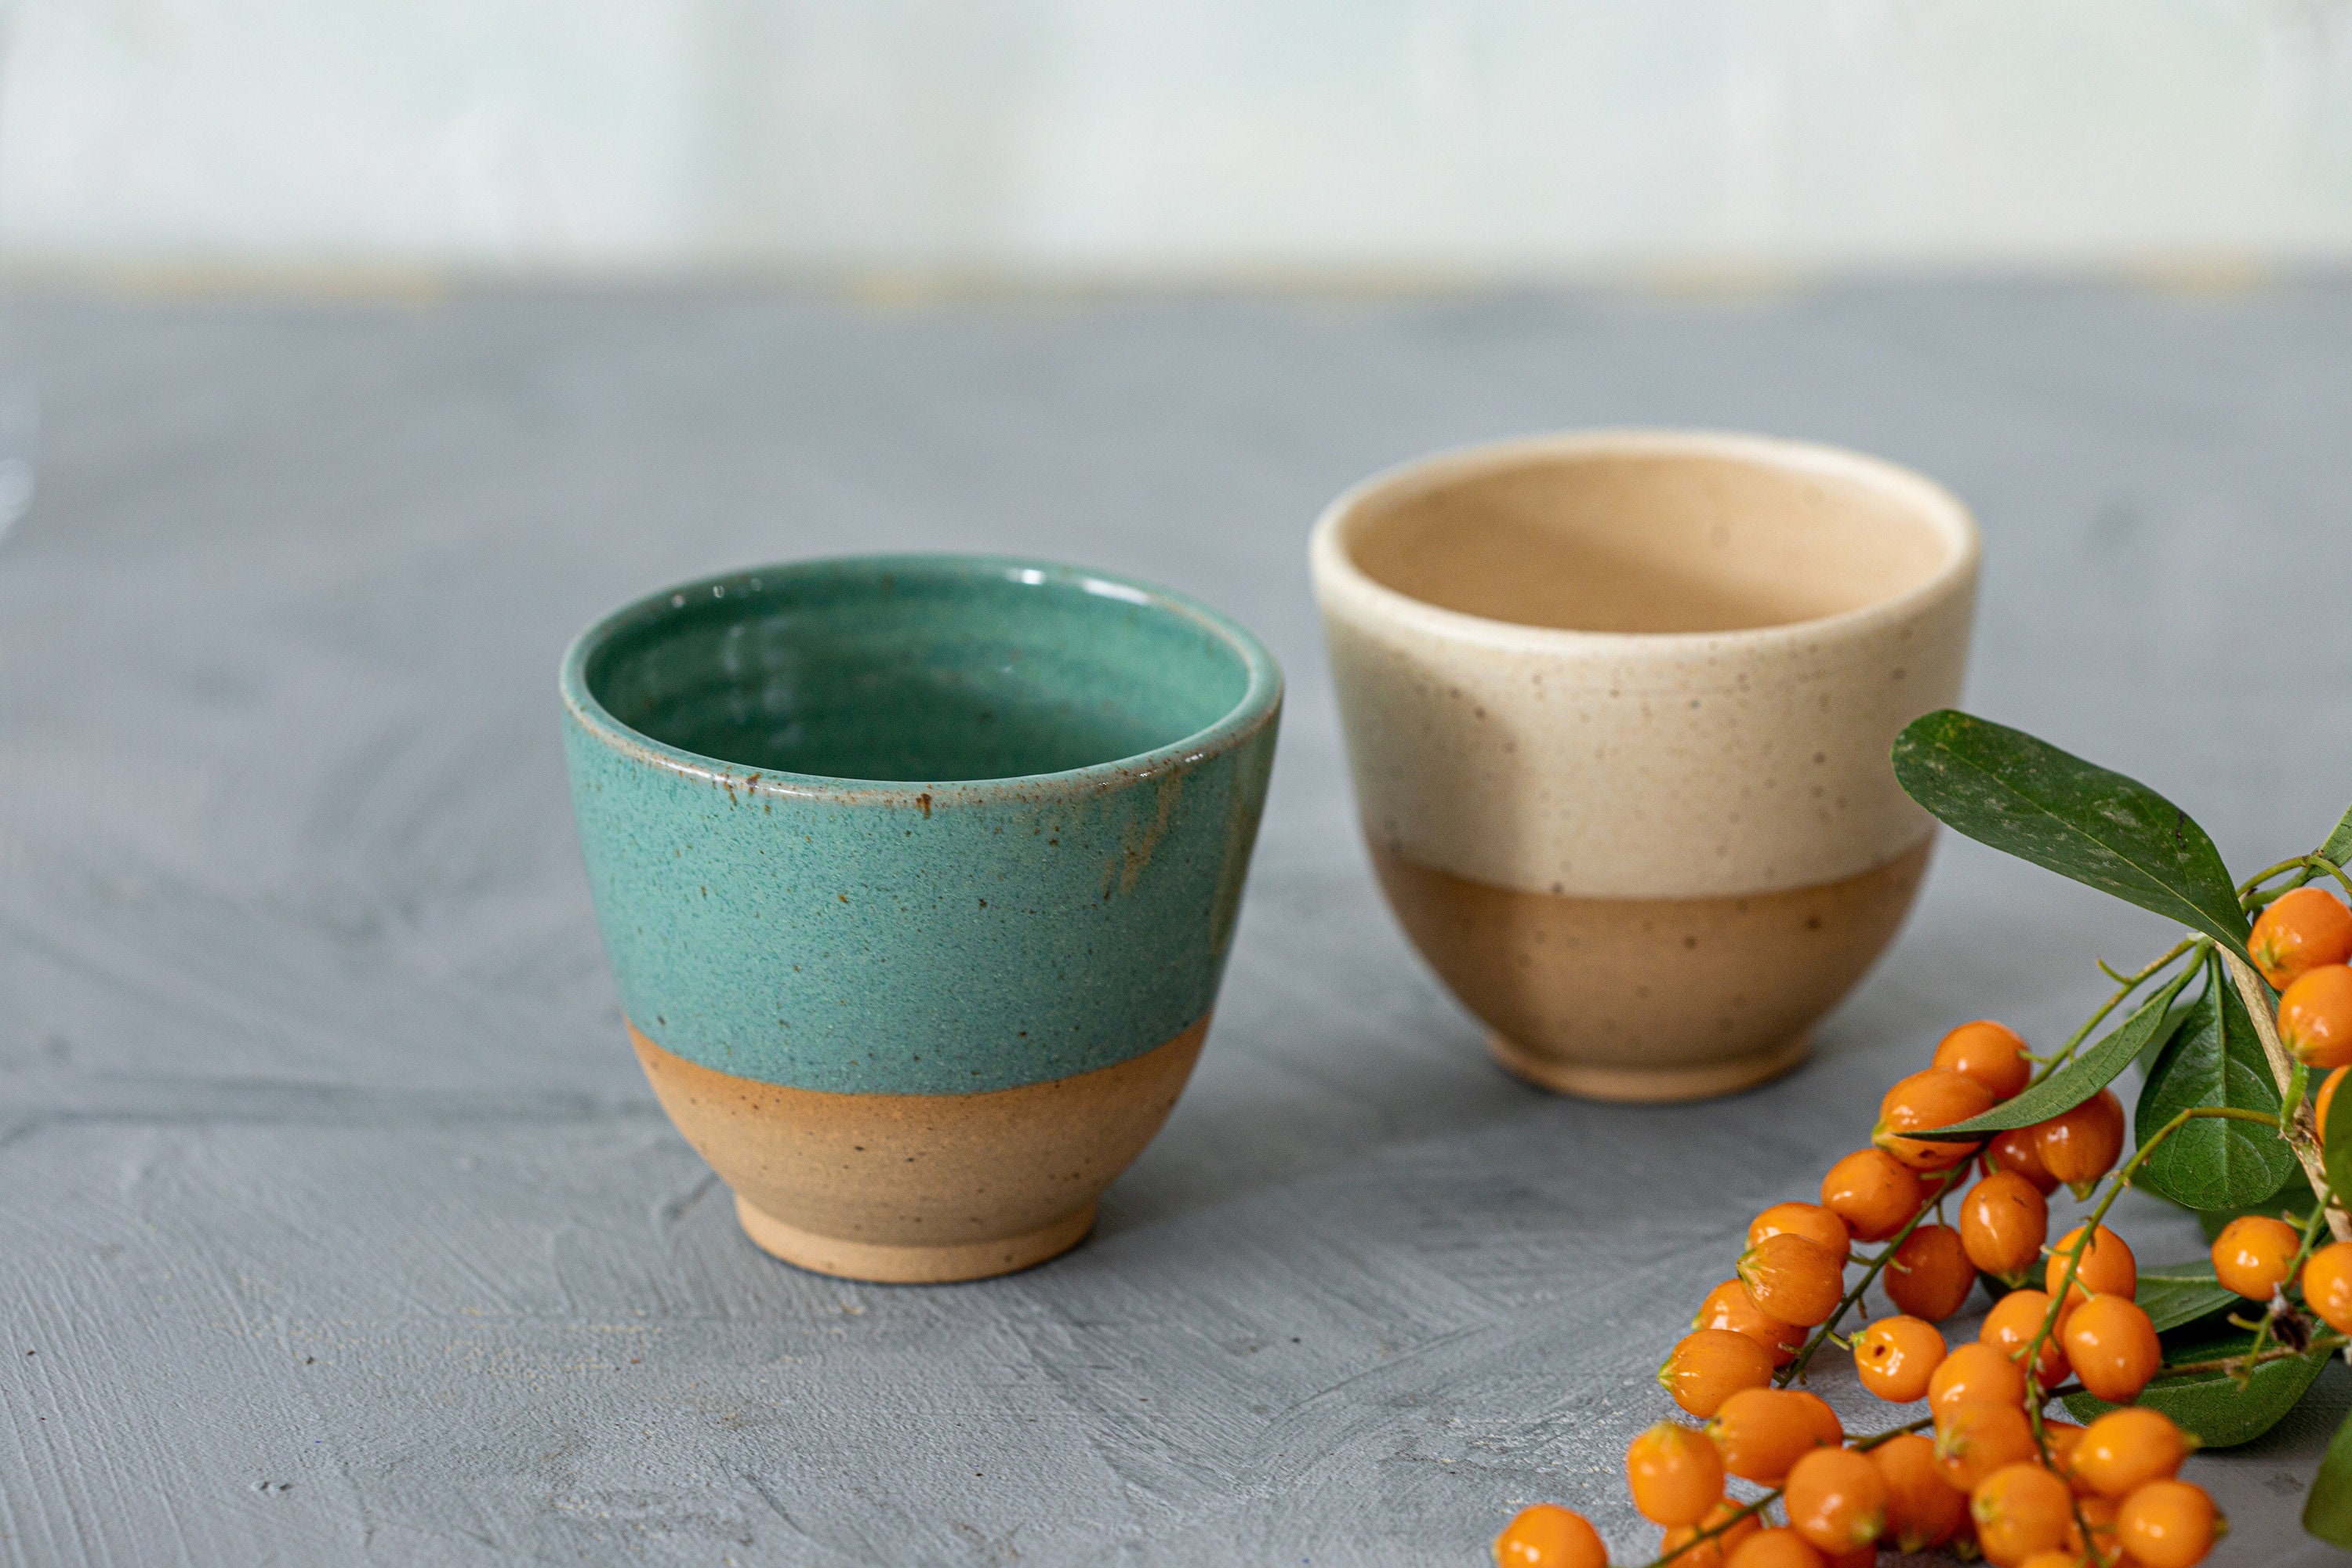 SET OF 4 Ceramic Espresso Cups With Saucer Handmade Pottery Organic  Tableware Unique Macchiato Cup With Saucer 